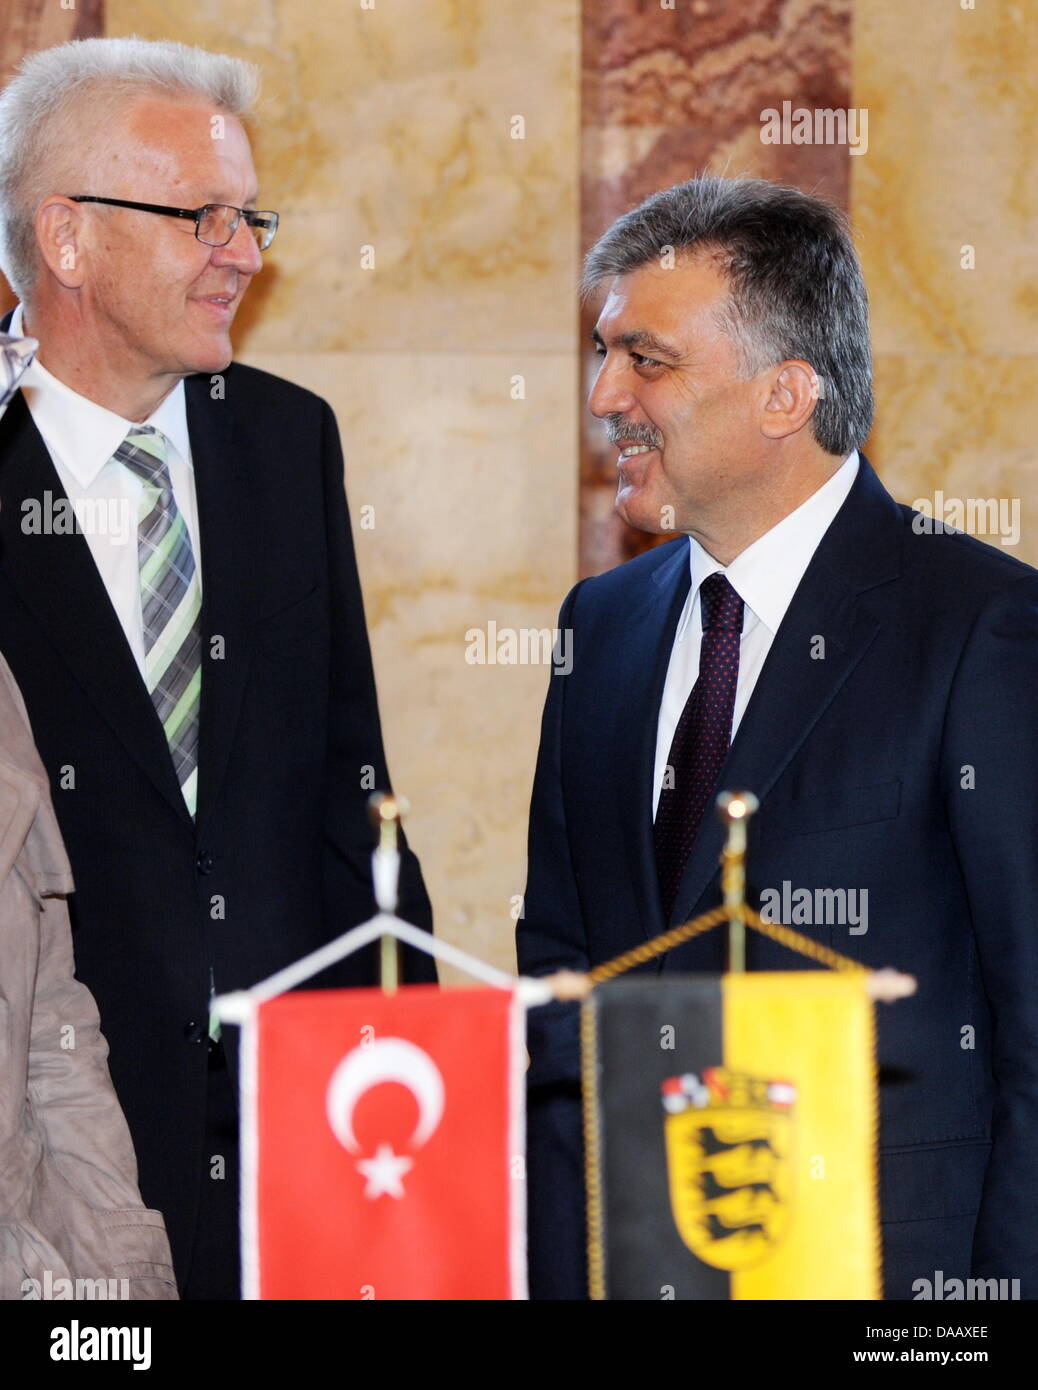 The Turkish President Abdullah Gul (R) stands next to the Prime Minister of Baden-Wuerttemberg Winfried Kretschmann (L) inside the New Palace in Stuttgart, Germany, 21 September 2011. Gul visited Stuttgart during his three-day-visit to Germany. Photo: BERND WEISSBROD Stock Photo